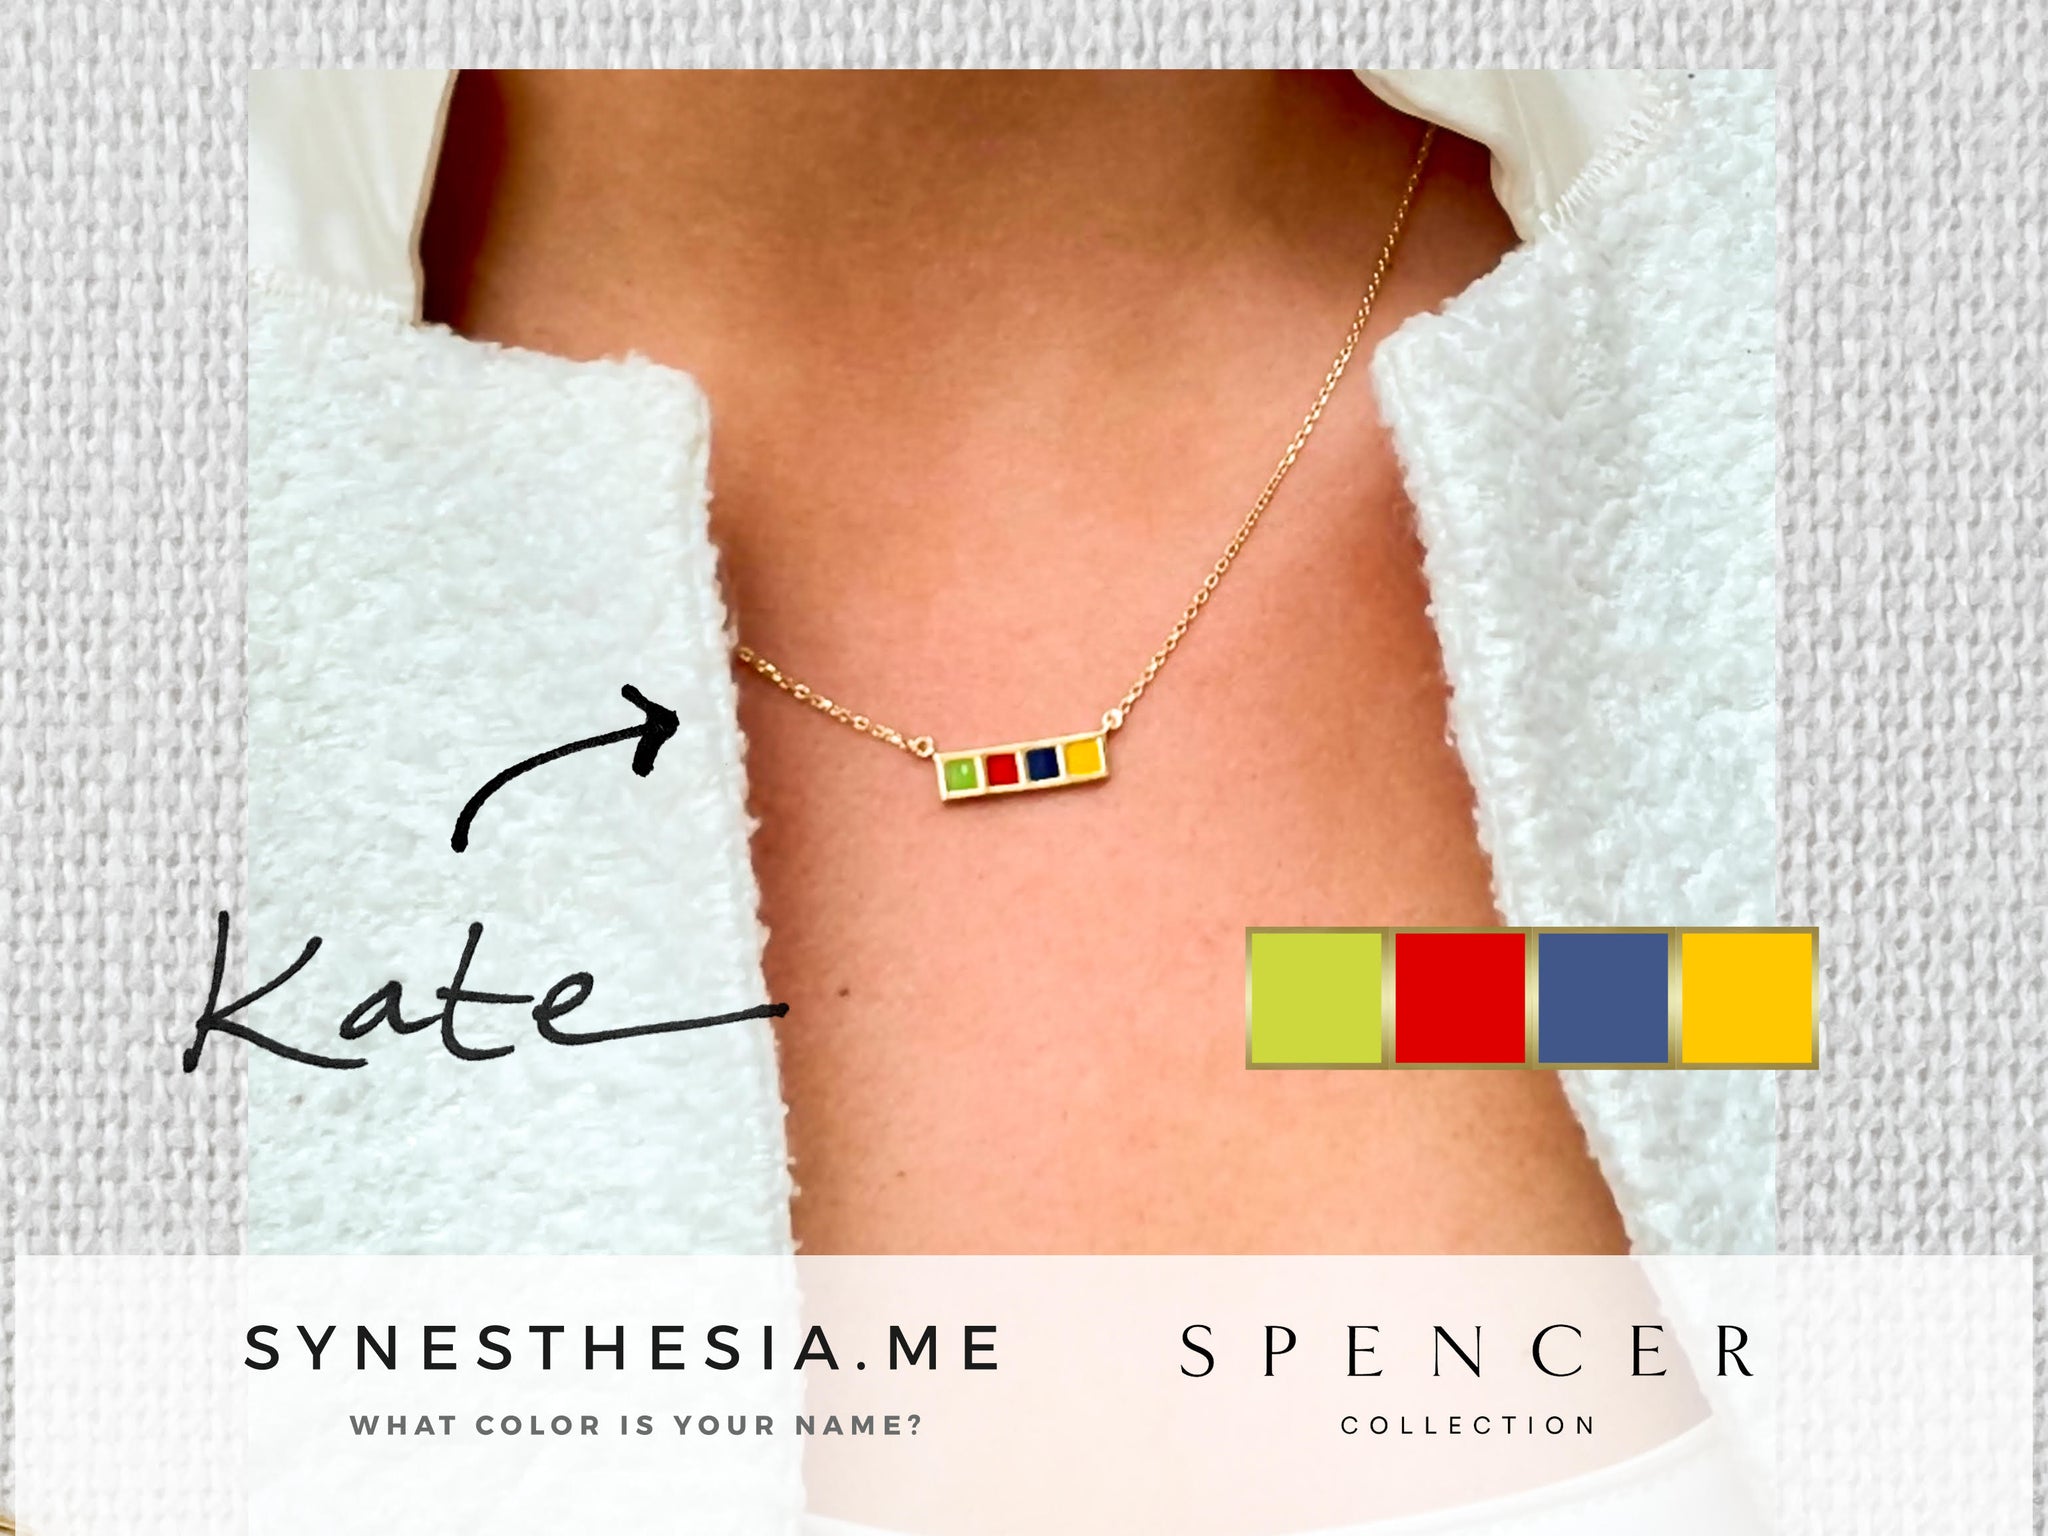 Kate "in color" Synesthesia Necklace